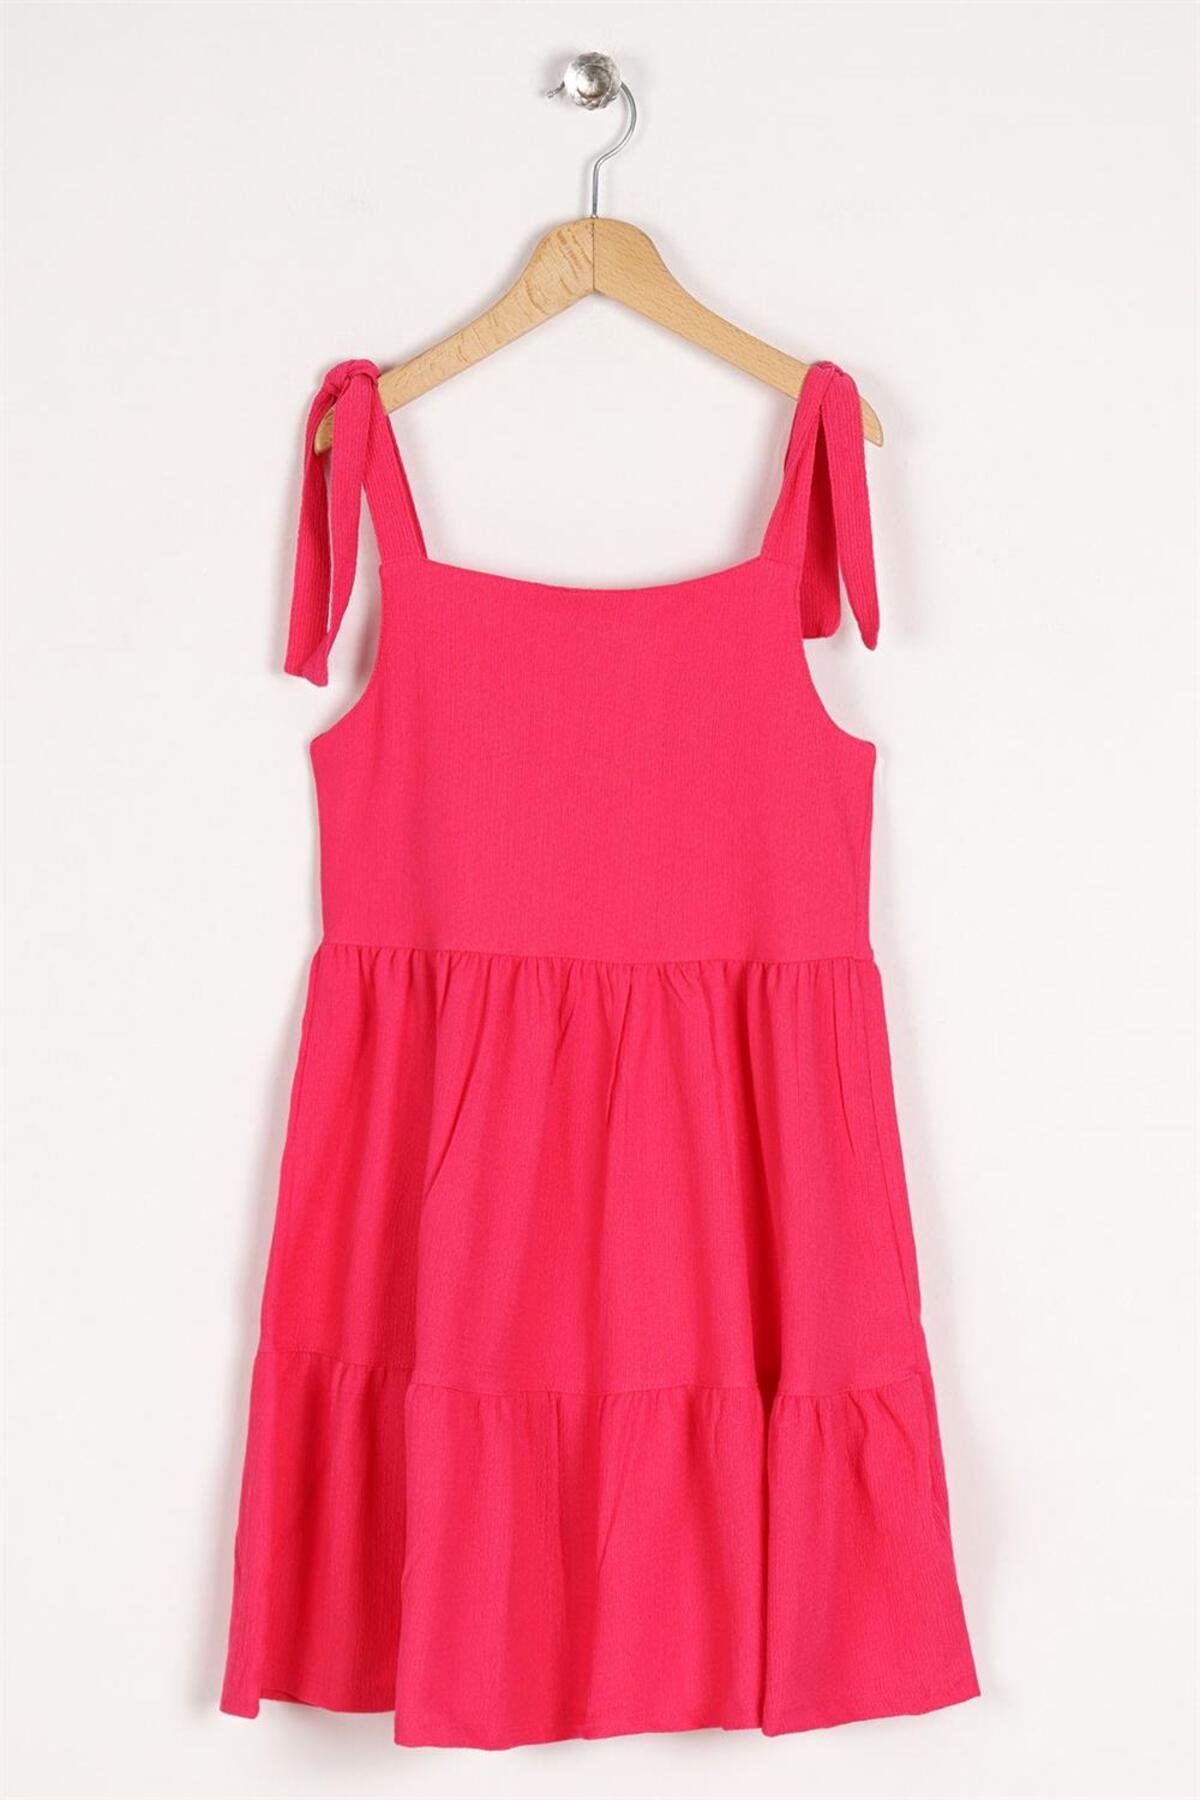 Girl's Fuchsia Colored Strap Front Button Detailed Dress